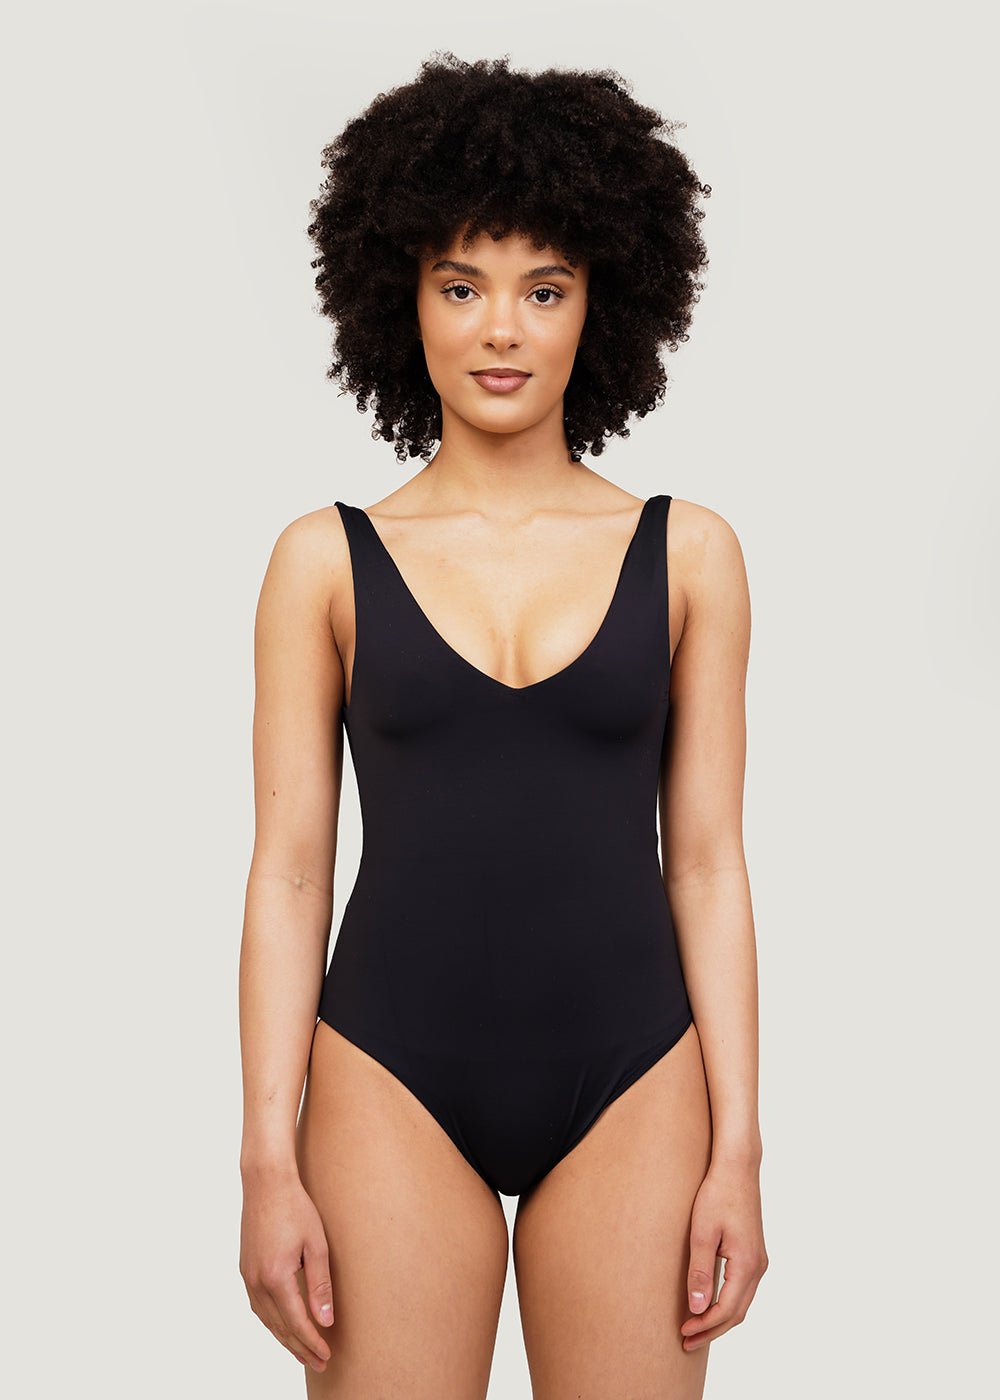 Plunge One Piece Swimsuit in Black by KYE INTIMATES – New Classics Studios